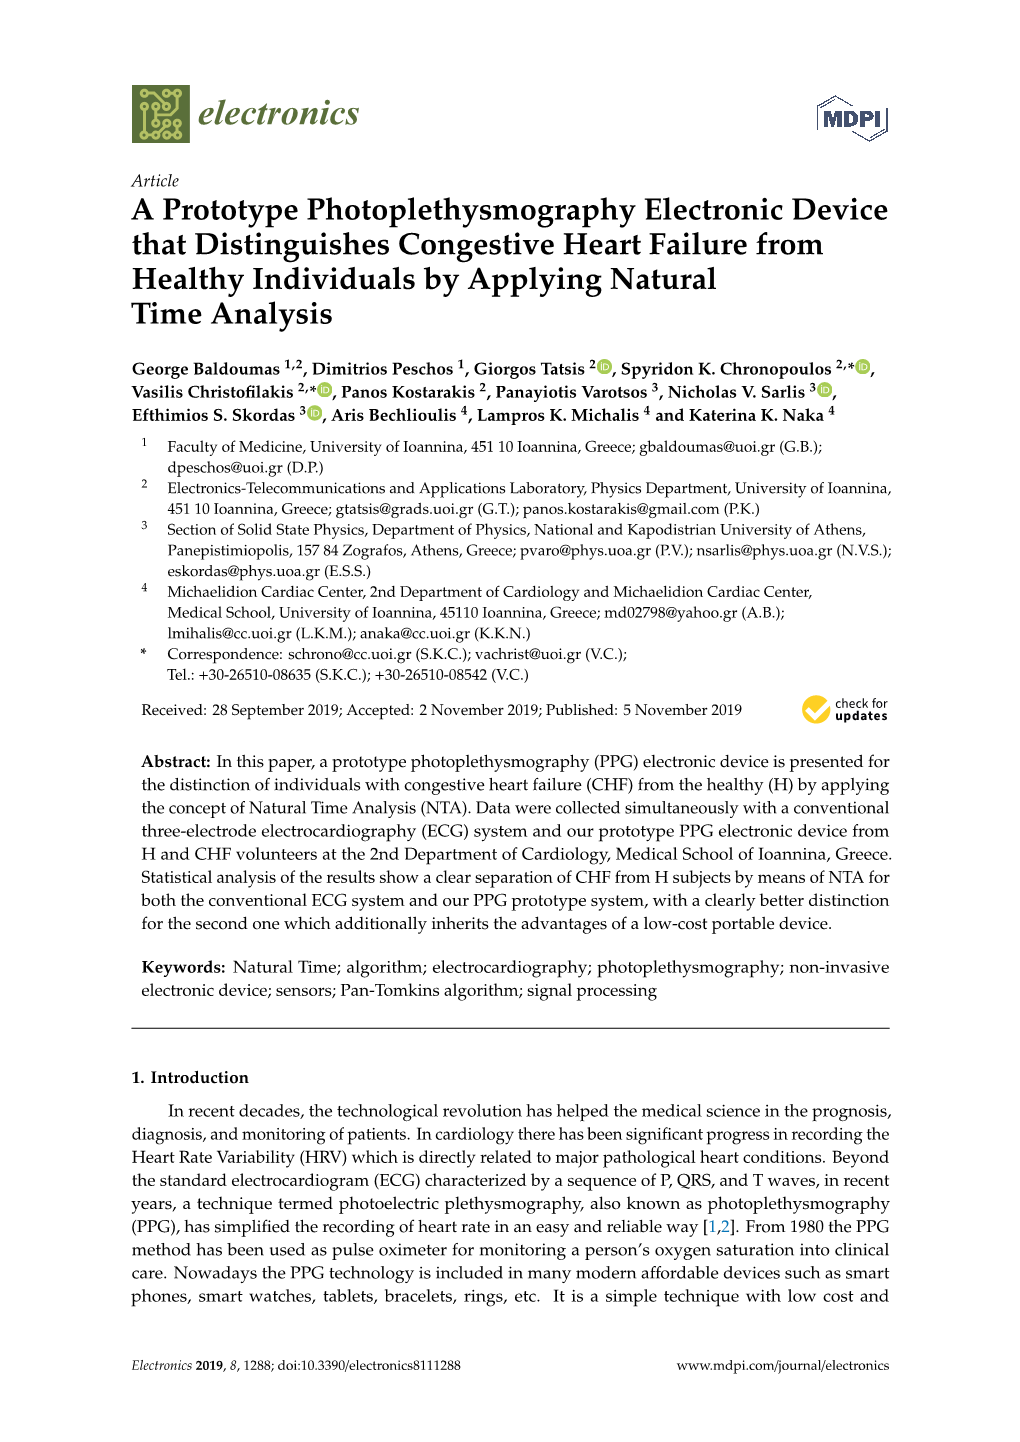 A Prototype Photoplethysmography Electronic Device That Distinguishes Congestive Heart Failure from Healthy Individuals by Applying Natural Time Analysis